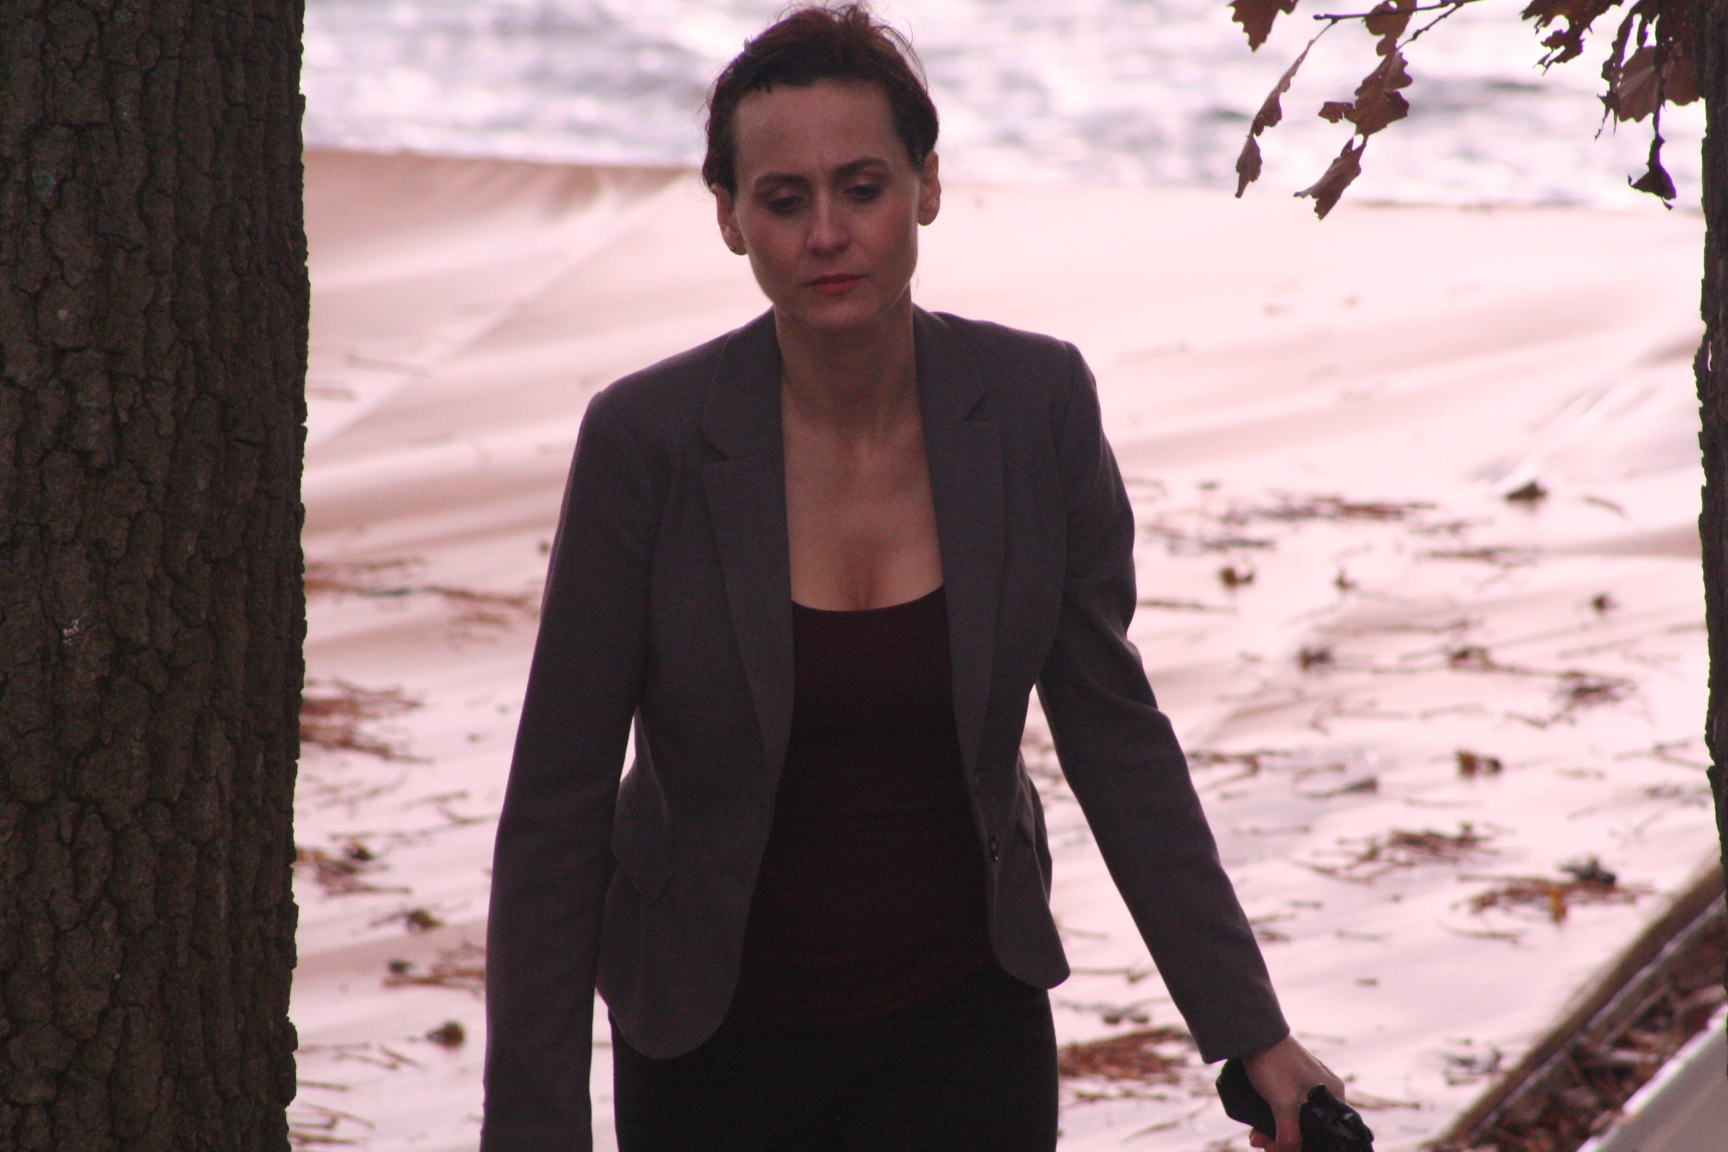 Jeanne Marie Spicuzza as LANA on location of 